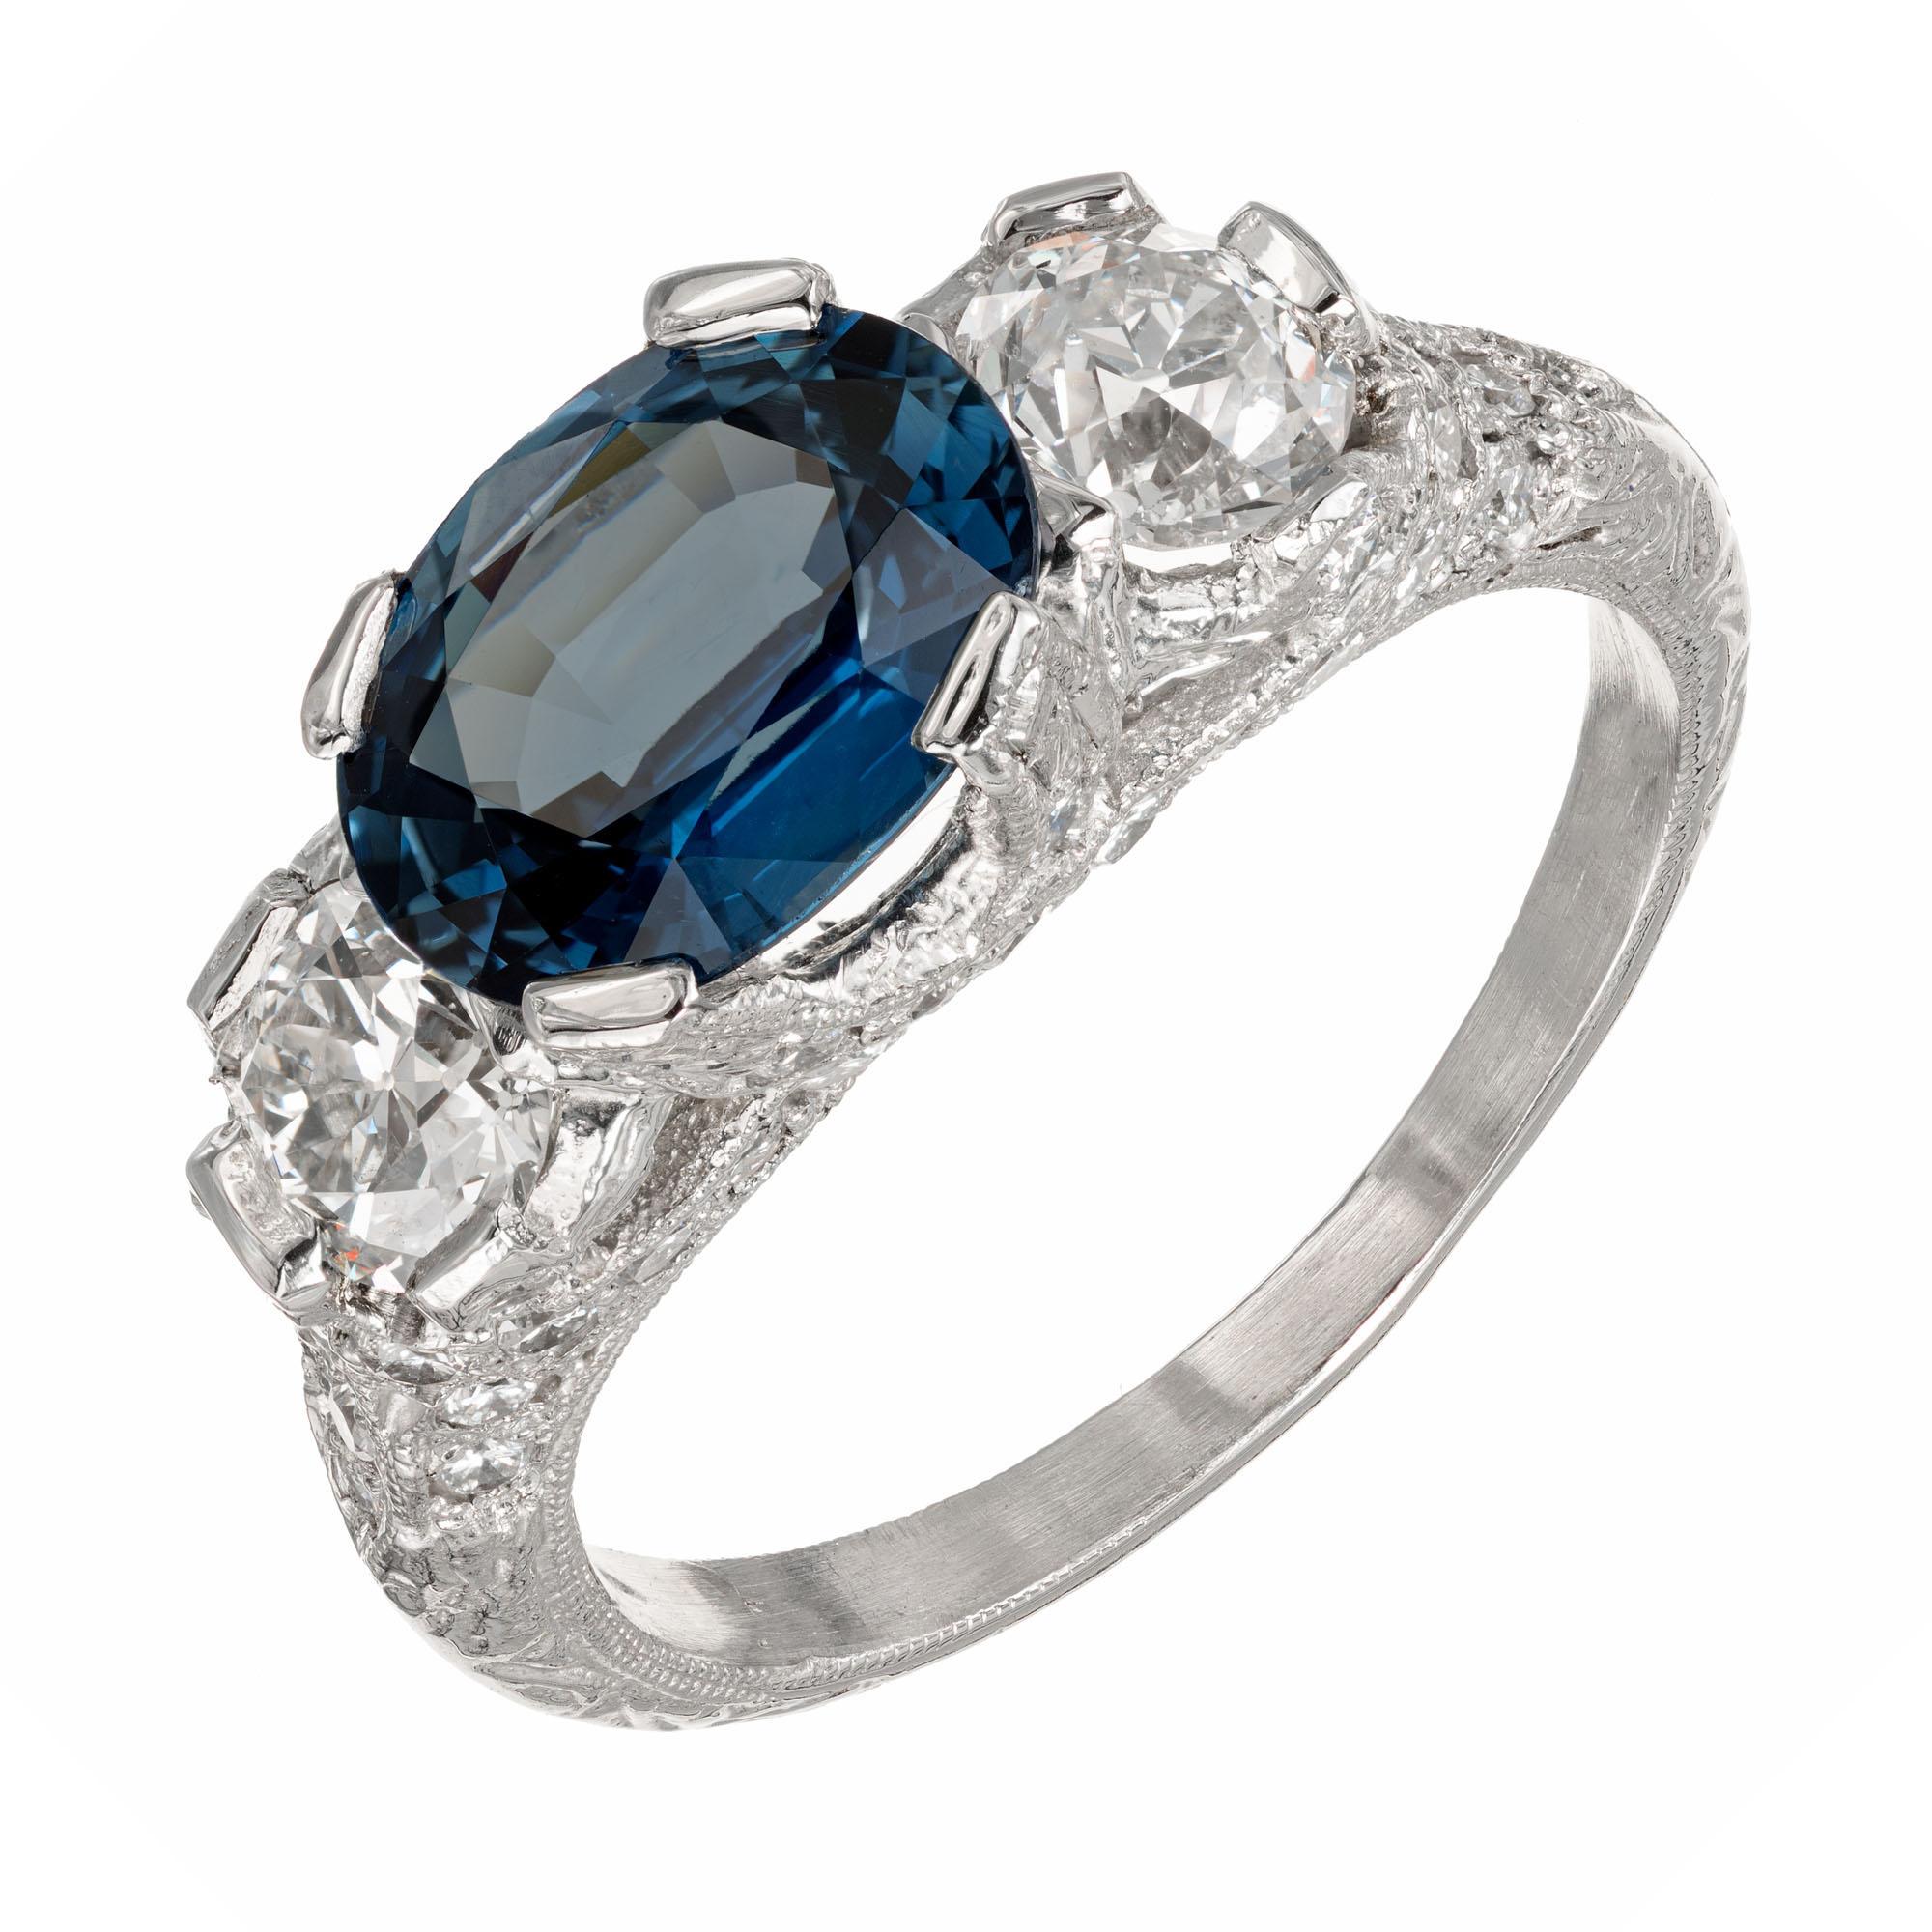 Peter Suchy Antique Inspired sapphire and diamond engagement ring.  Complete with crossed prongs, hand engraving and pave diamonds.  The main stones are from an estate circa 1920 with European cut diamonds and a bright blue sapphire 2.11ct GIA